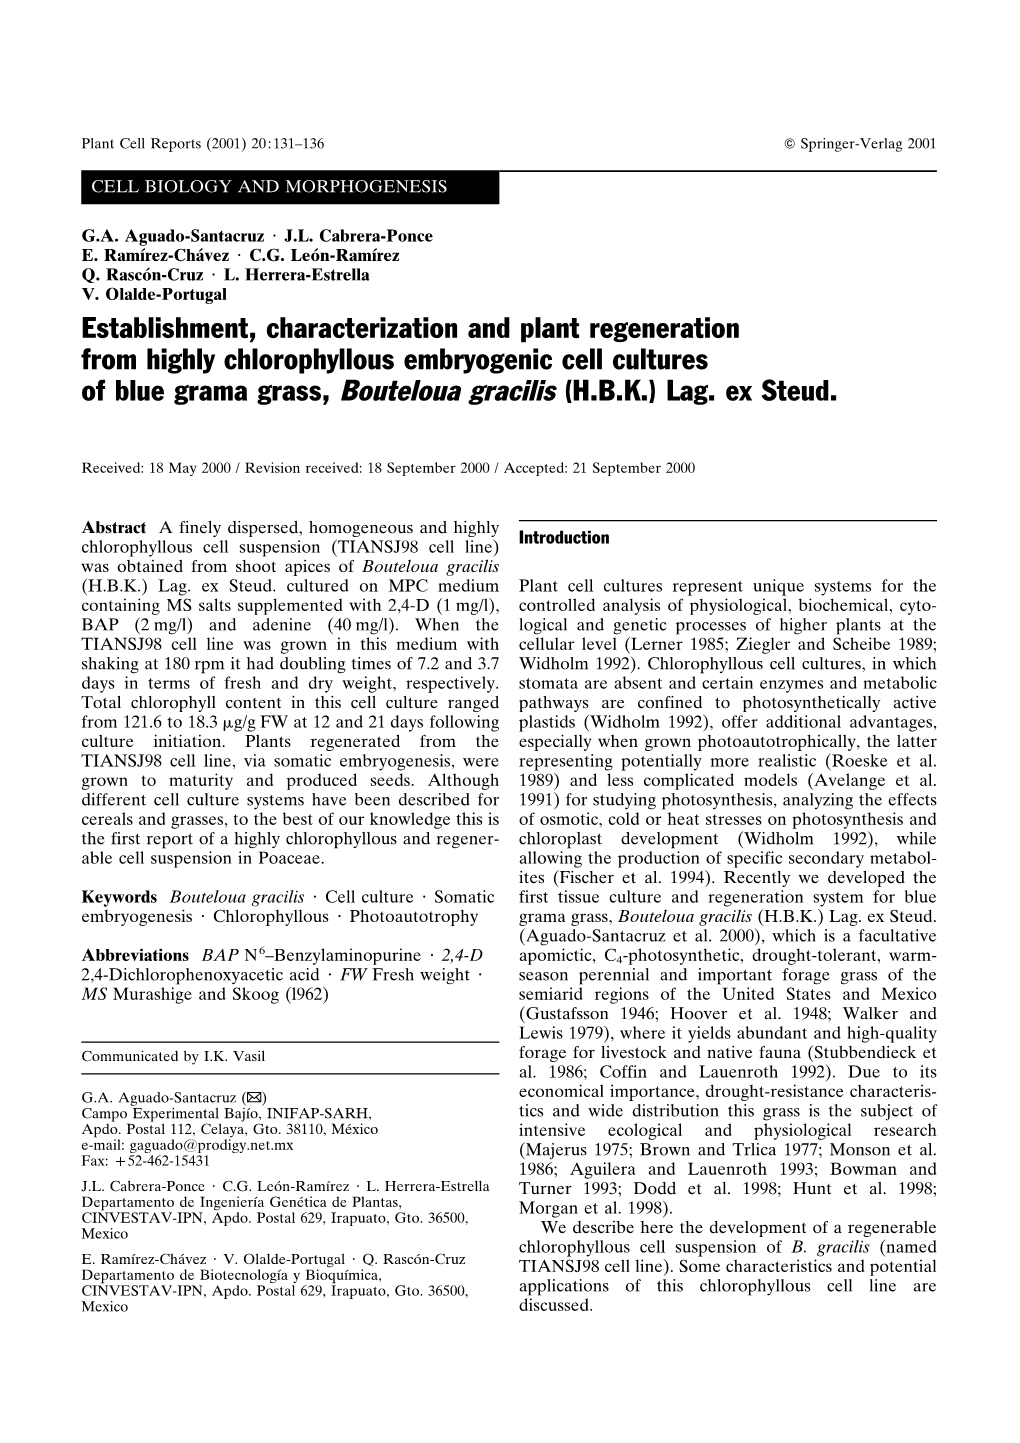 Establishment, Characterization and Plant Regeneration from Highly Chlorophyllous Embryogenic Cell Cultures of Blue Grama Grass, Bouteloua Gracilis (H.B.K.) Lag